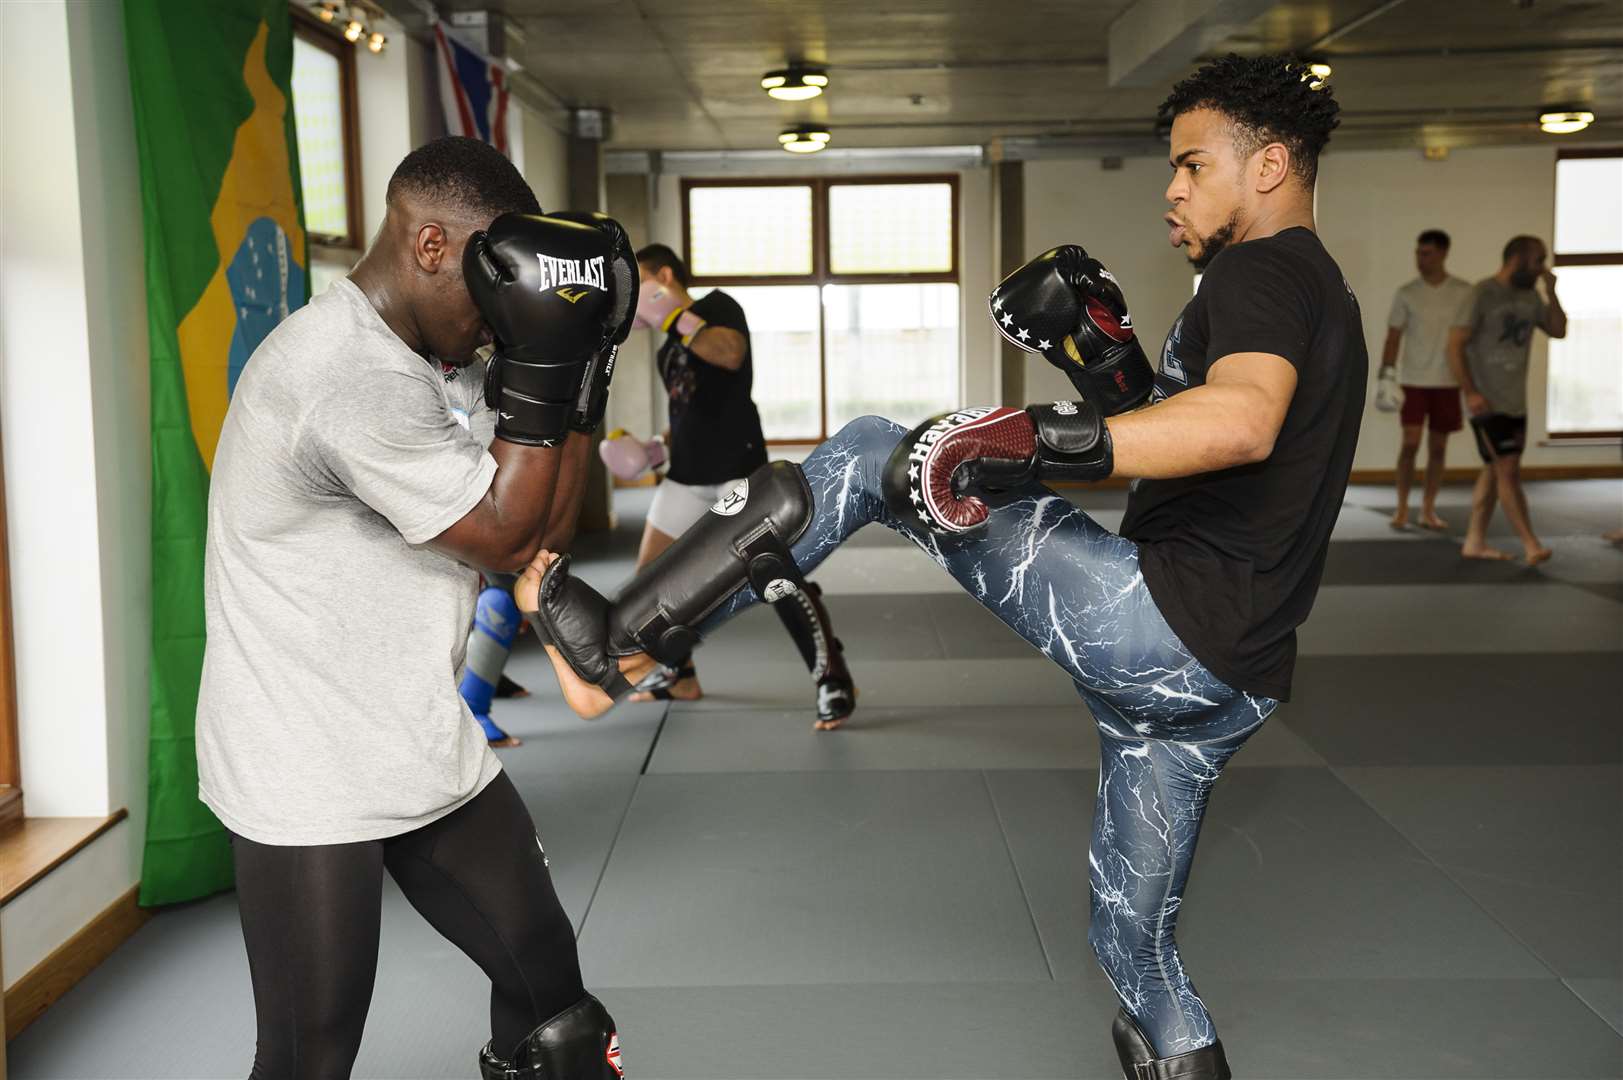 Fighter go through their paces at Revolution Martial Arts